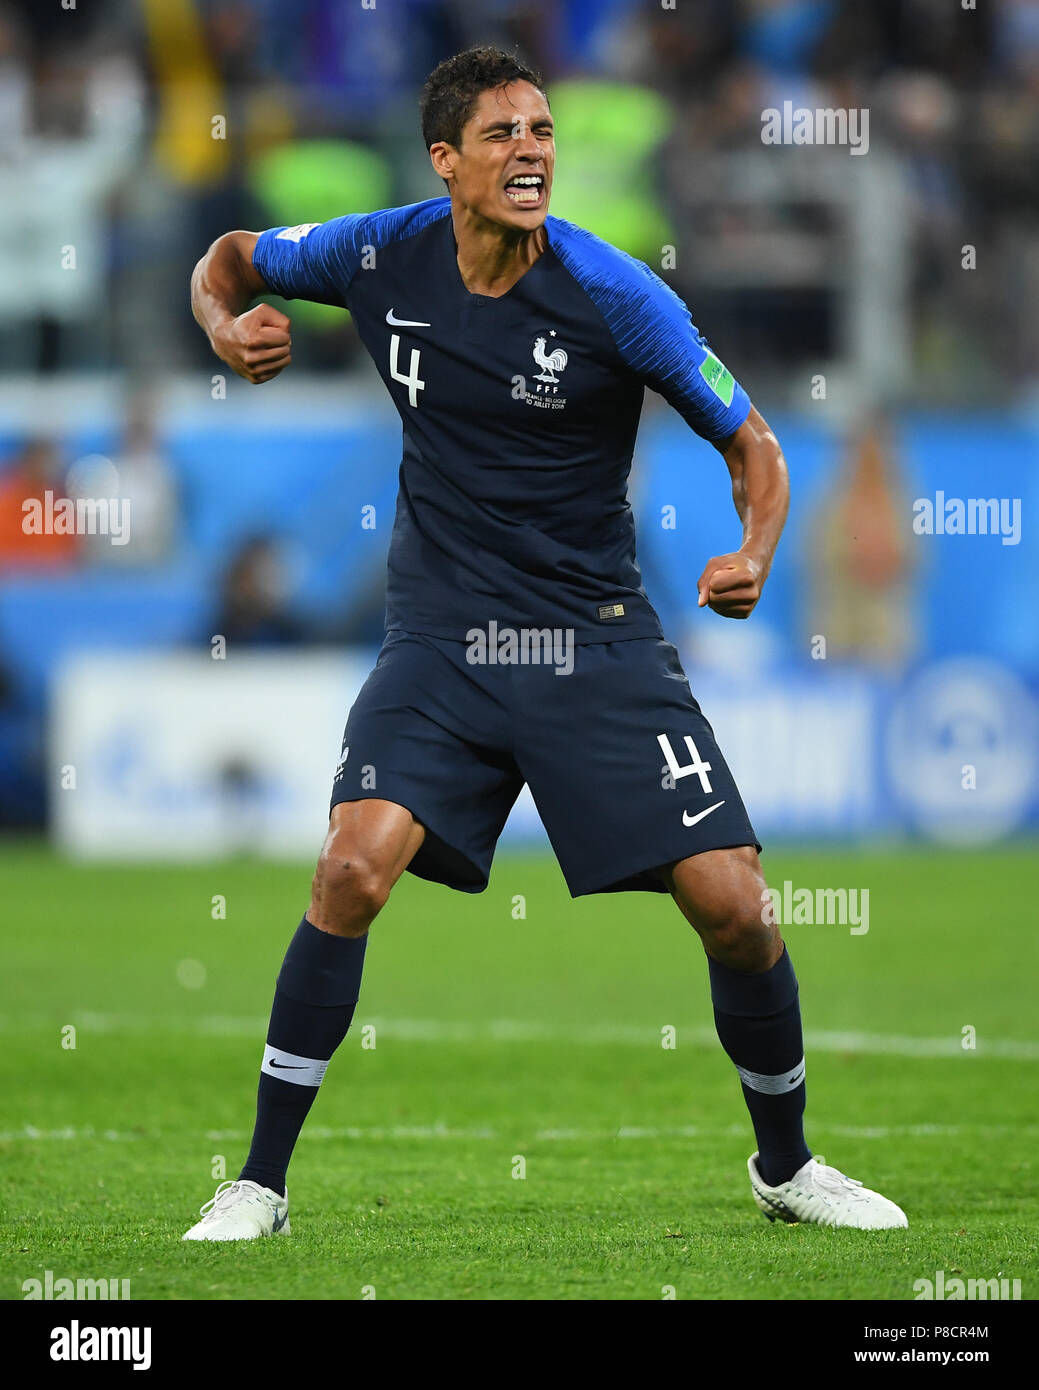 Final Jubilation Raphael Varane France Is Looking Forward To The Finals Ges Football World Cup 2018 Russia Semi Finals France Belgium 10 07 2018 Ges Soccer Football Worldcup 2018